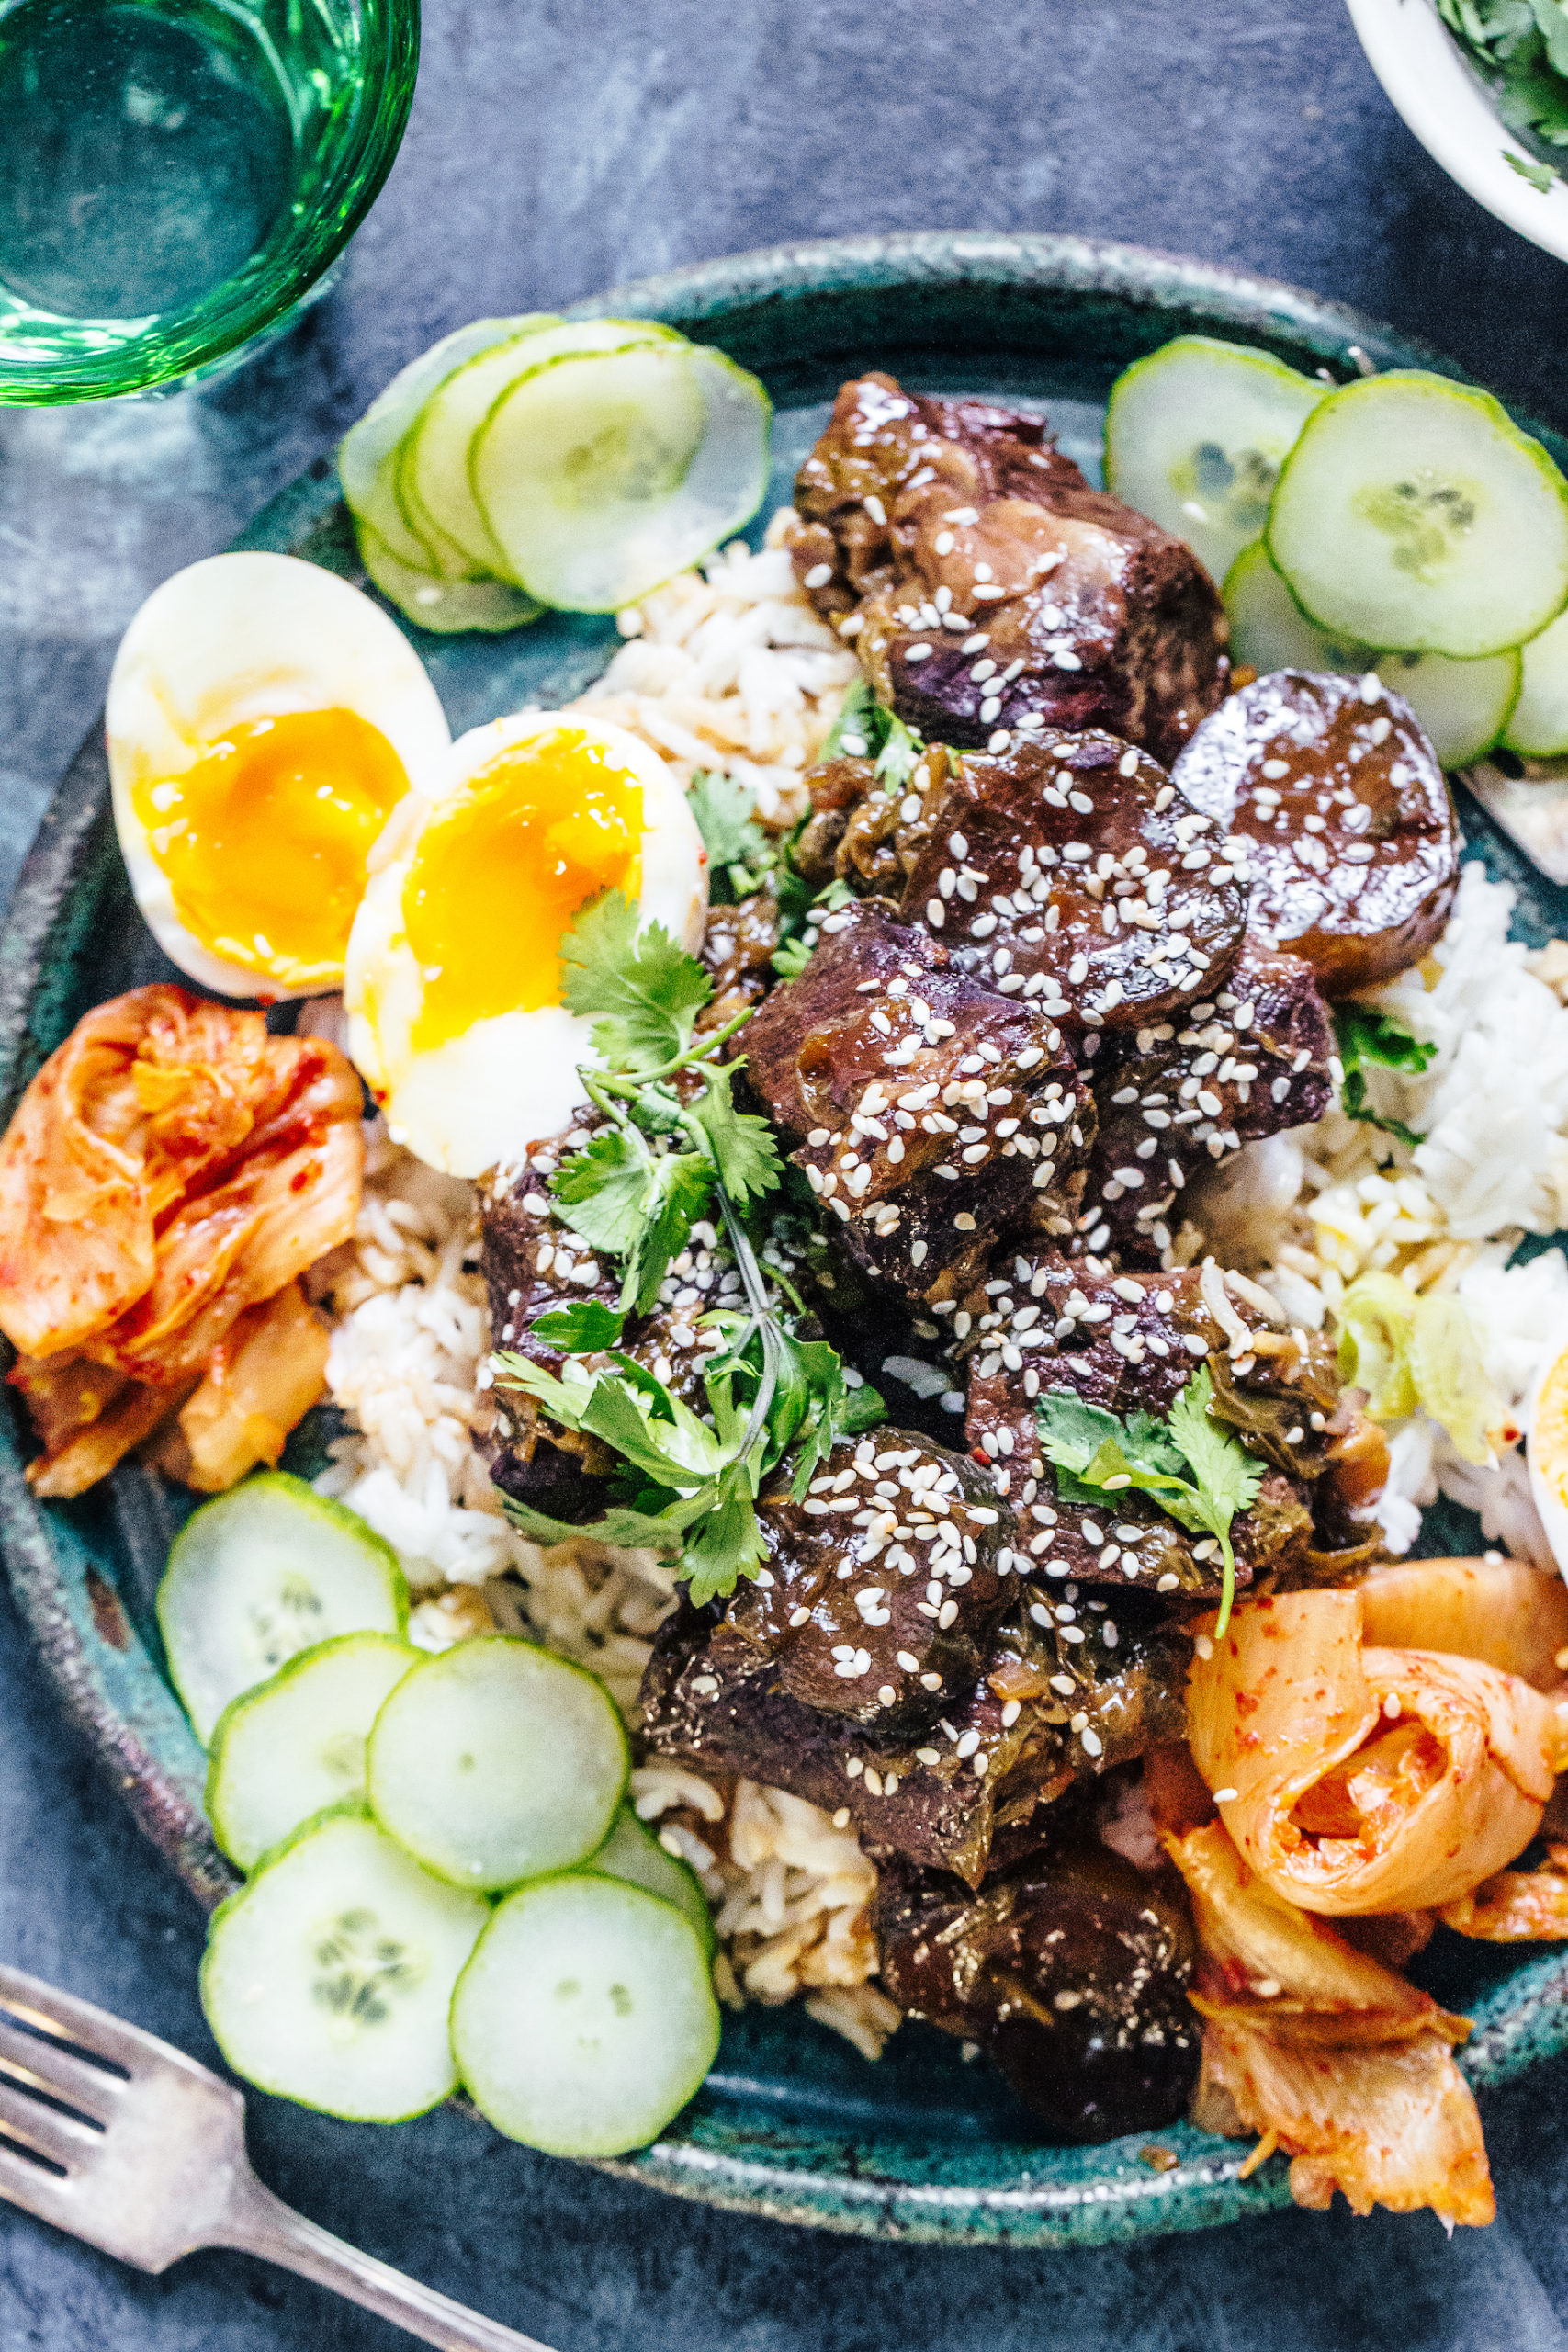 New! Delicious Korean Braised Beef with Pickles and Jammy Eggs